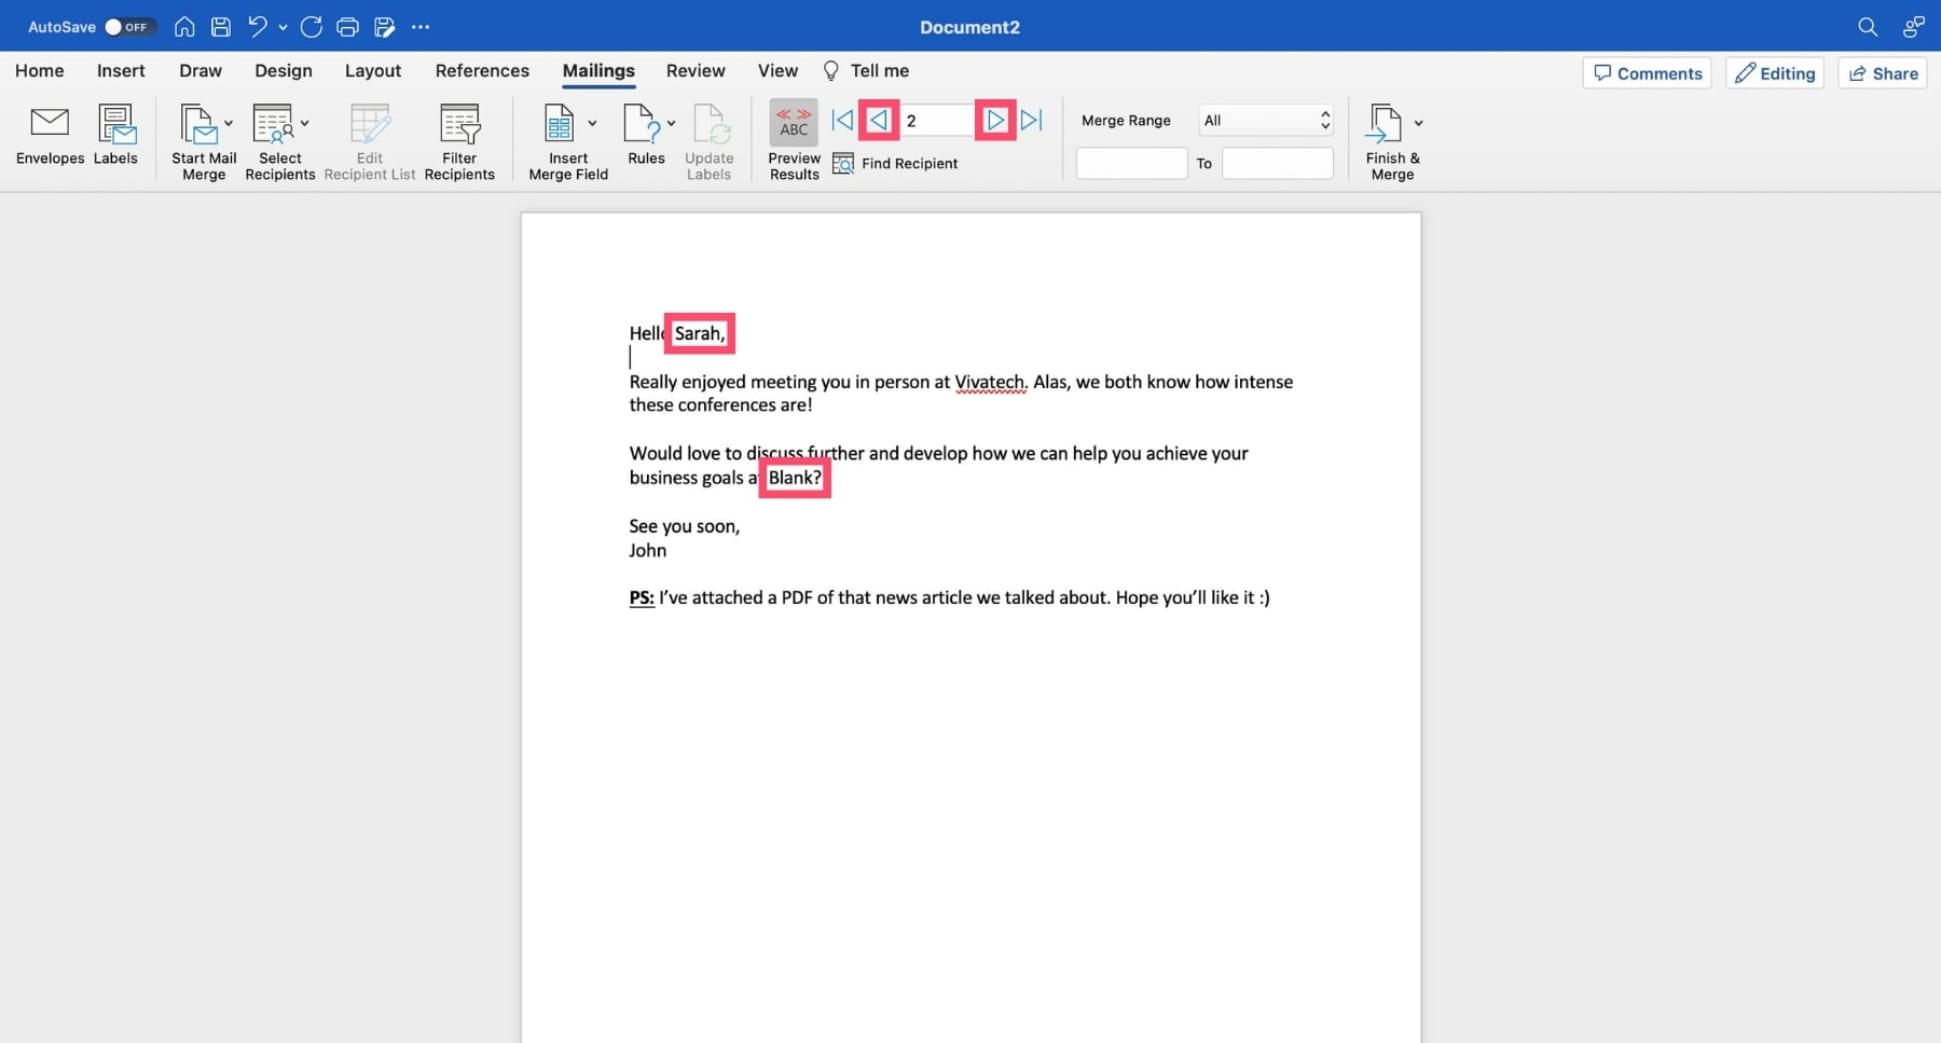 Preview your mail merge in Word